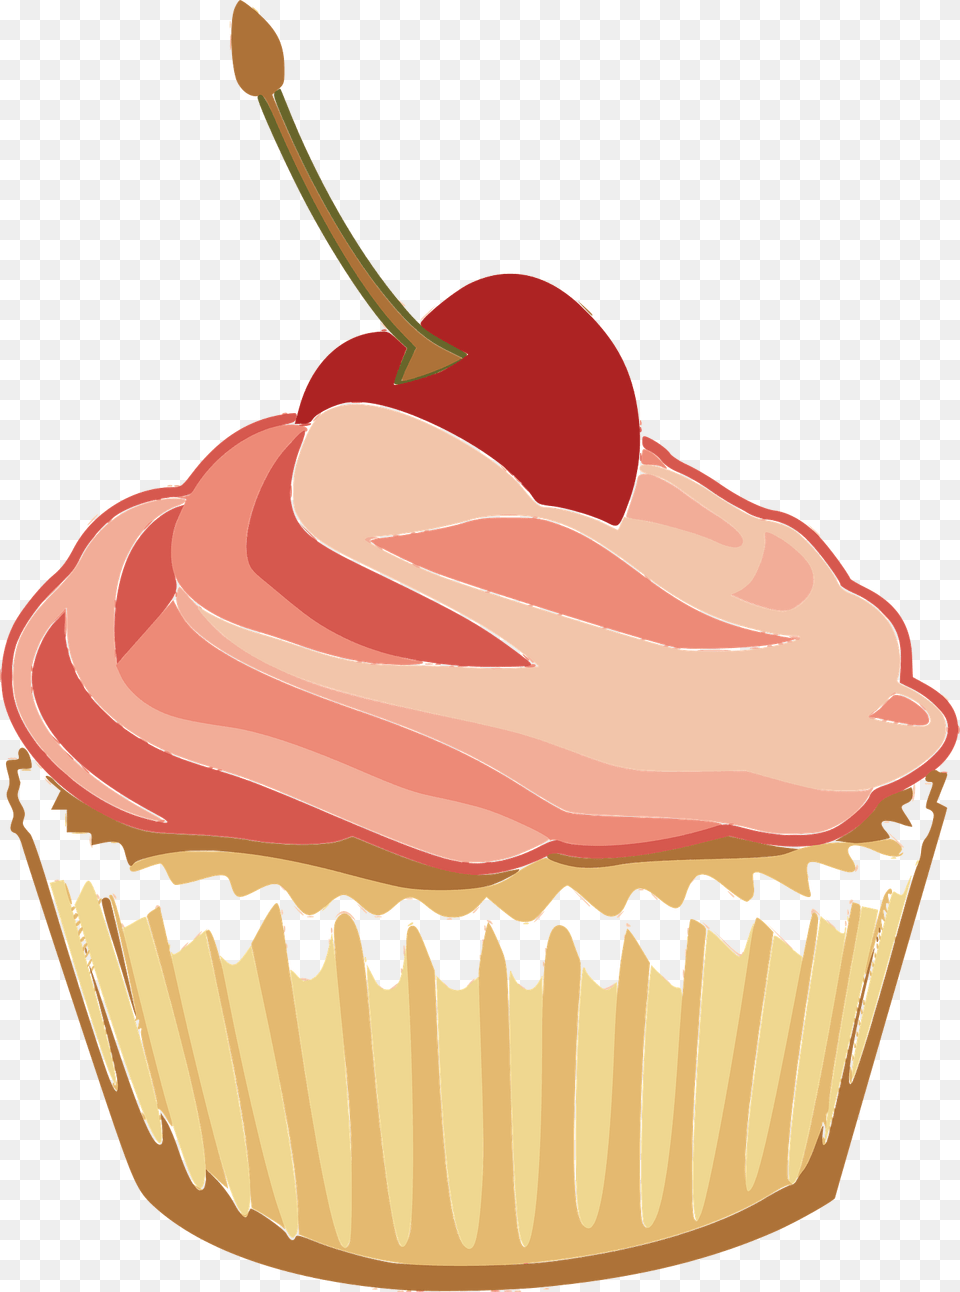 Cupcake With Pink Frosting And A Cherry Clipart, Cake, Cream, Dessert, Food Free Transparent Png